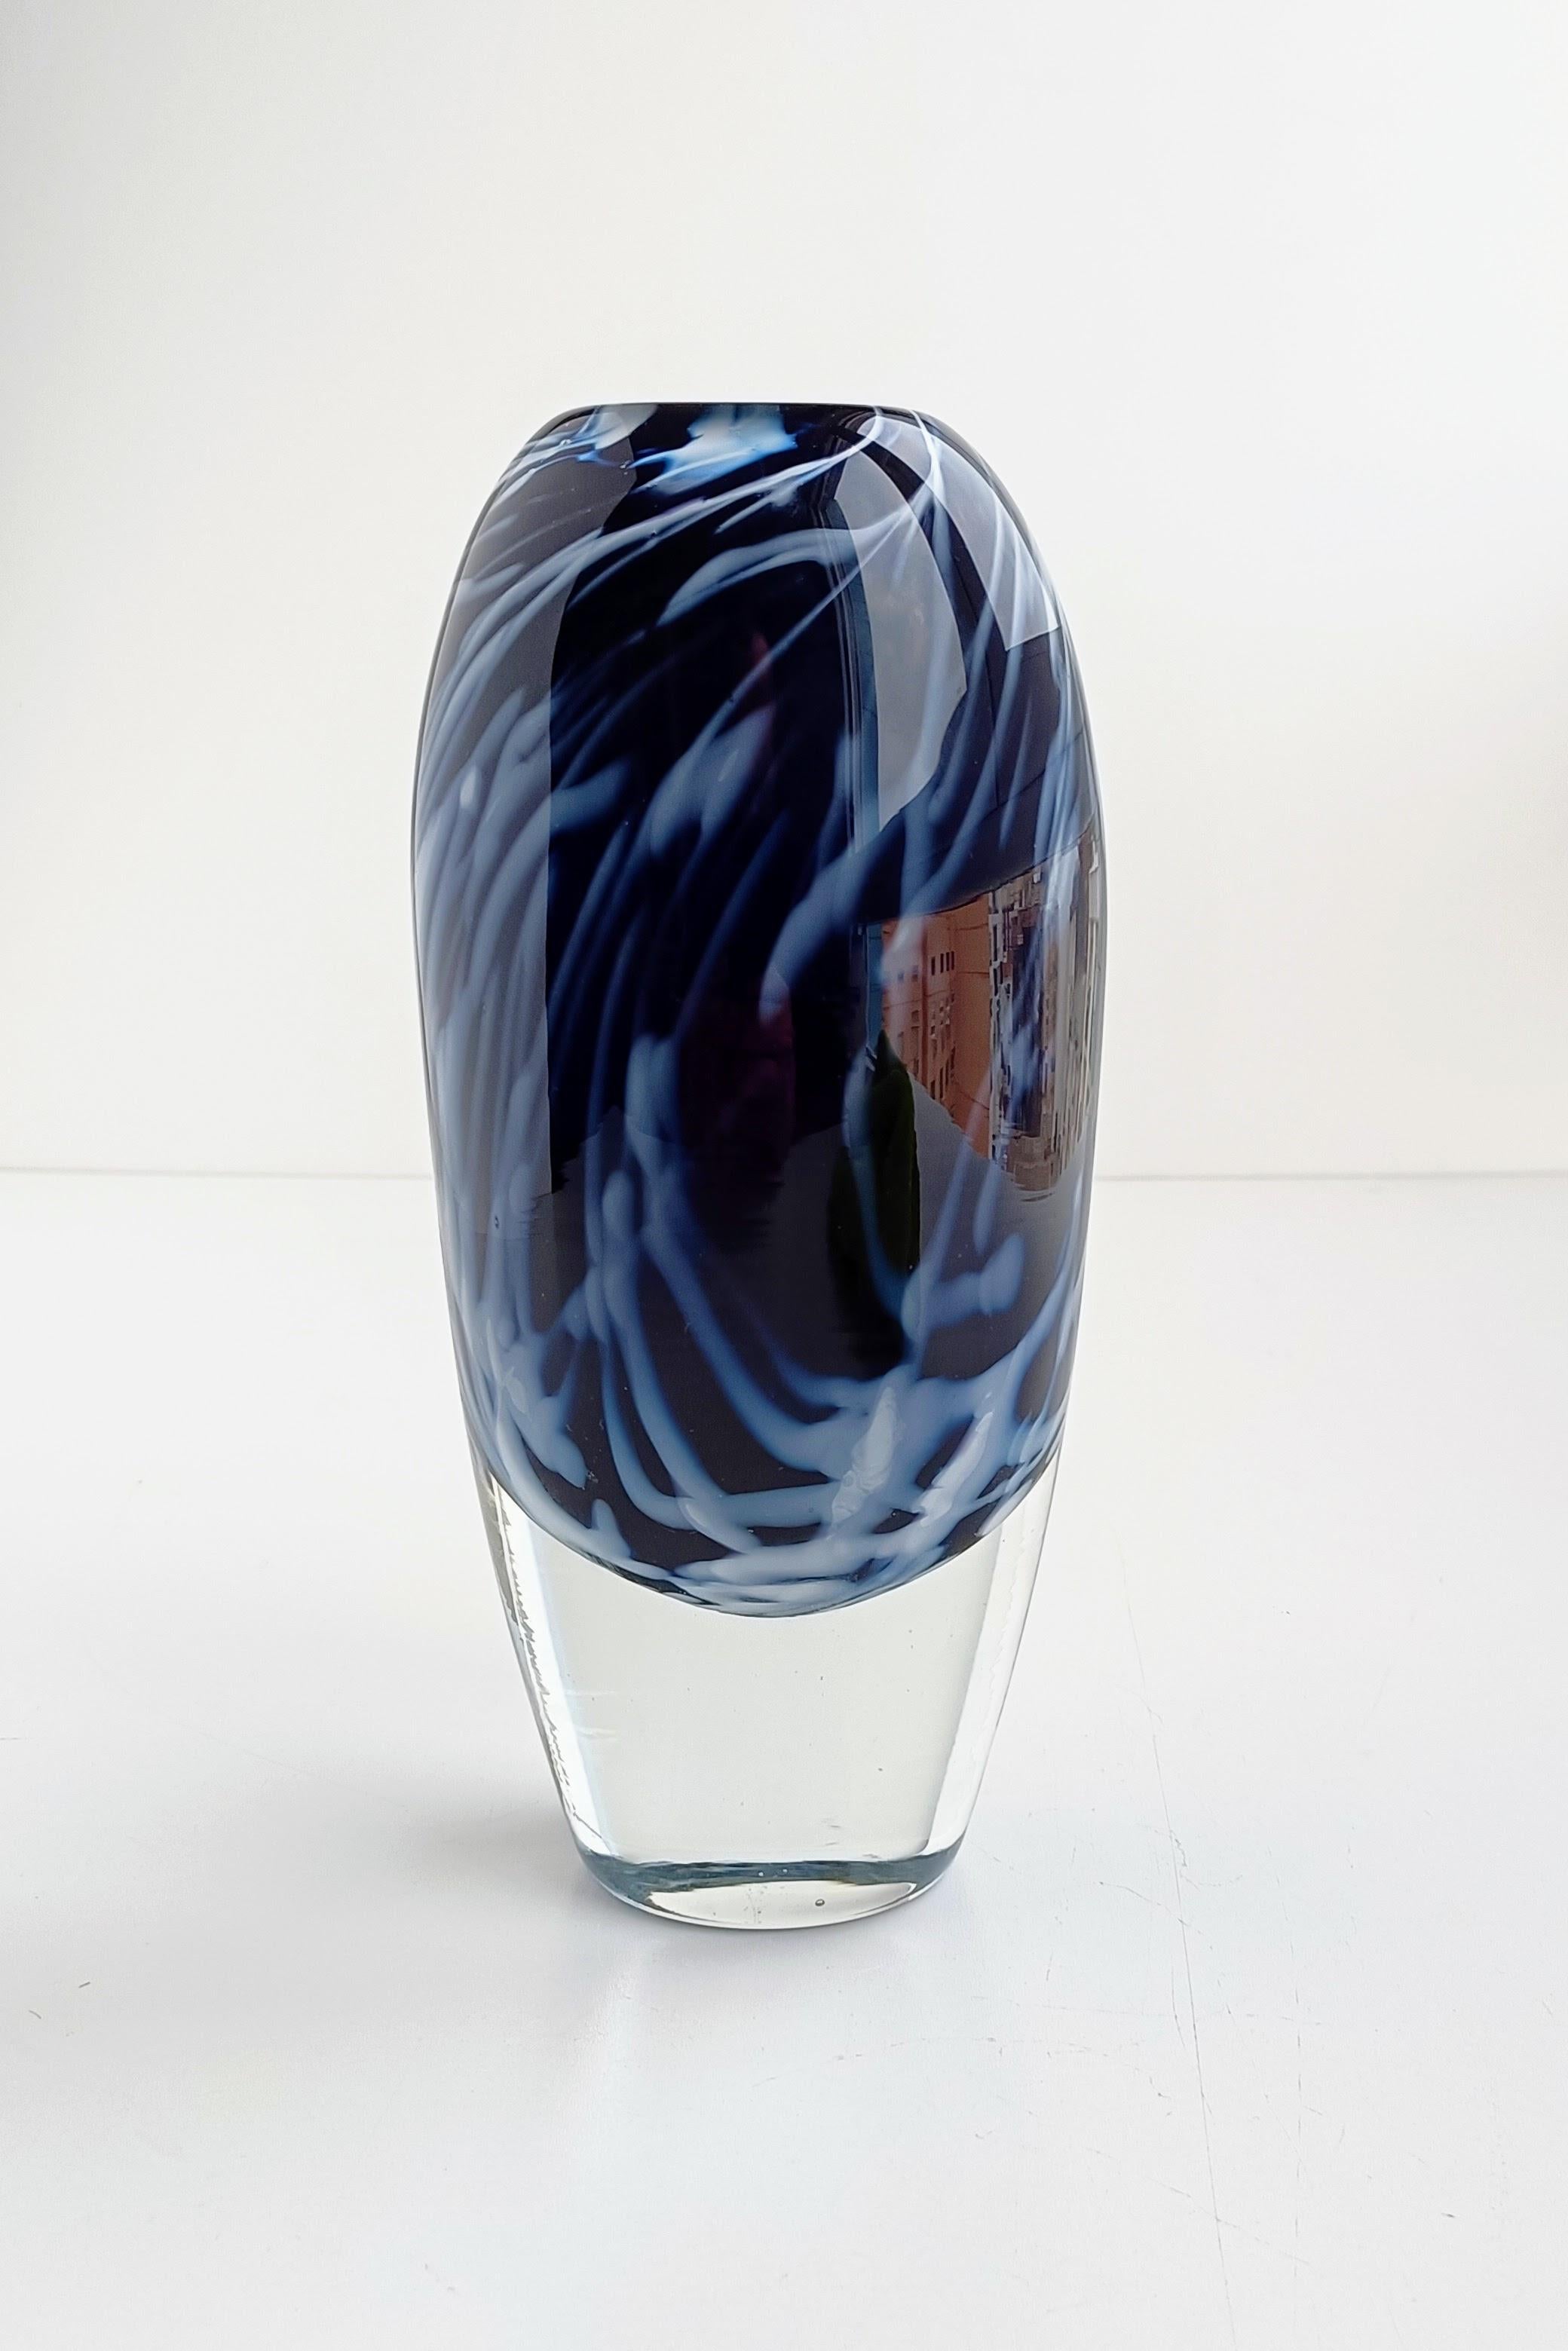 Scandinavian Modern Art Glass Orrefors by Walter Johansson, Signed and Numbered For Sale 6